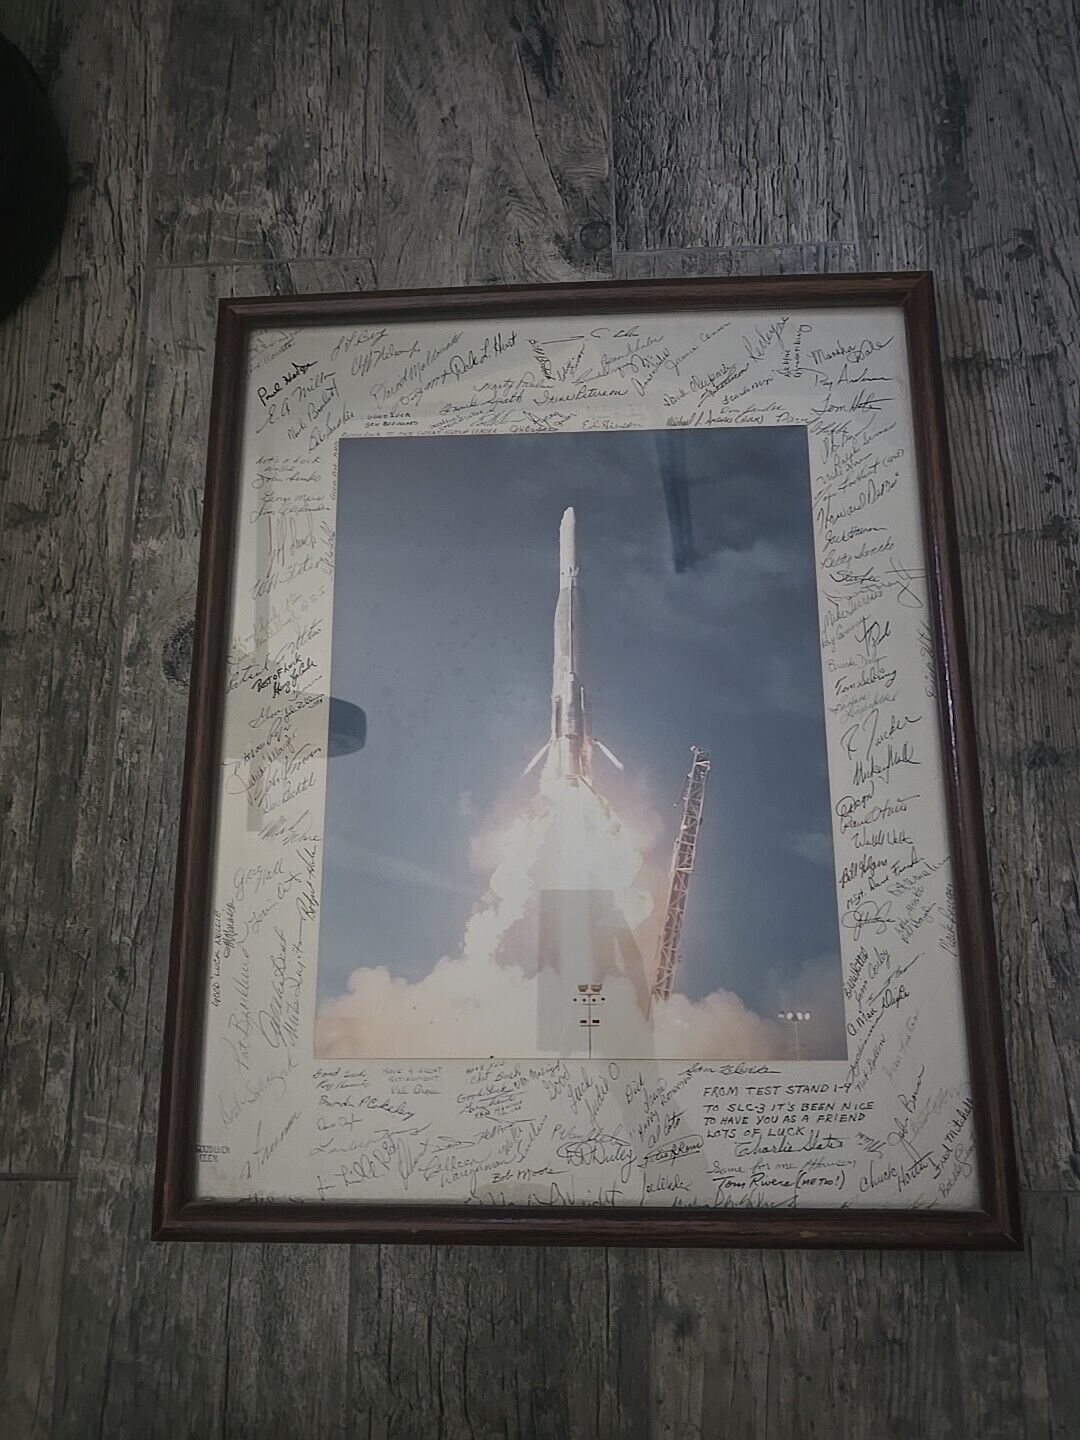 NASA Launch Photograph With Over 110 Signatures